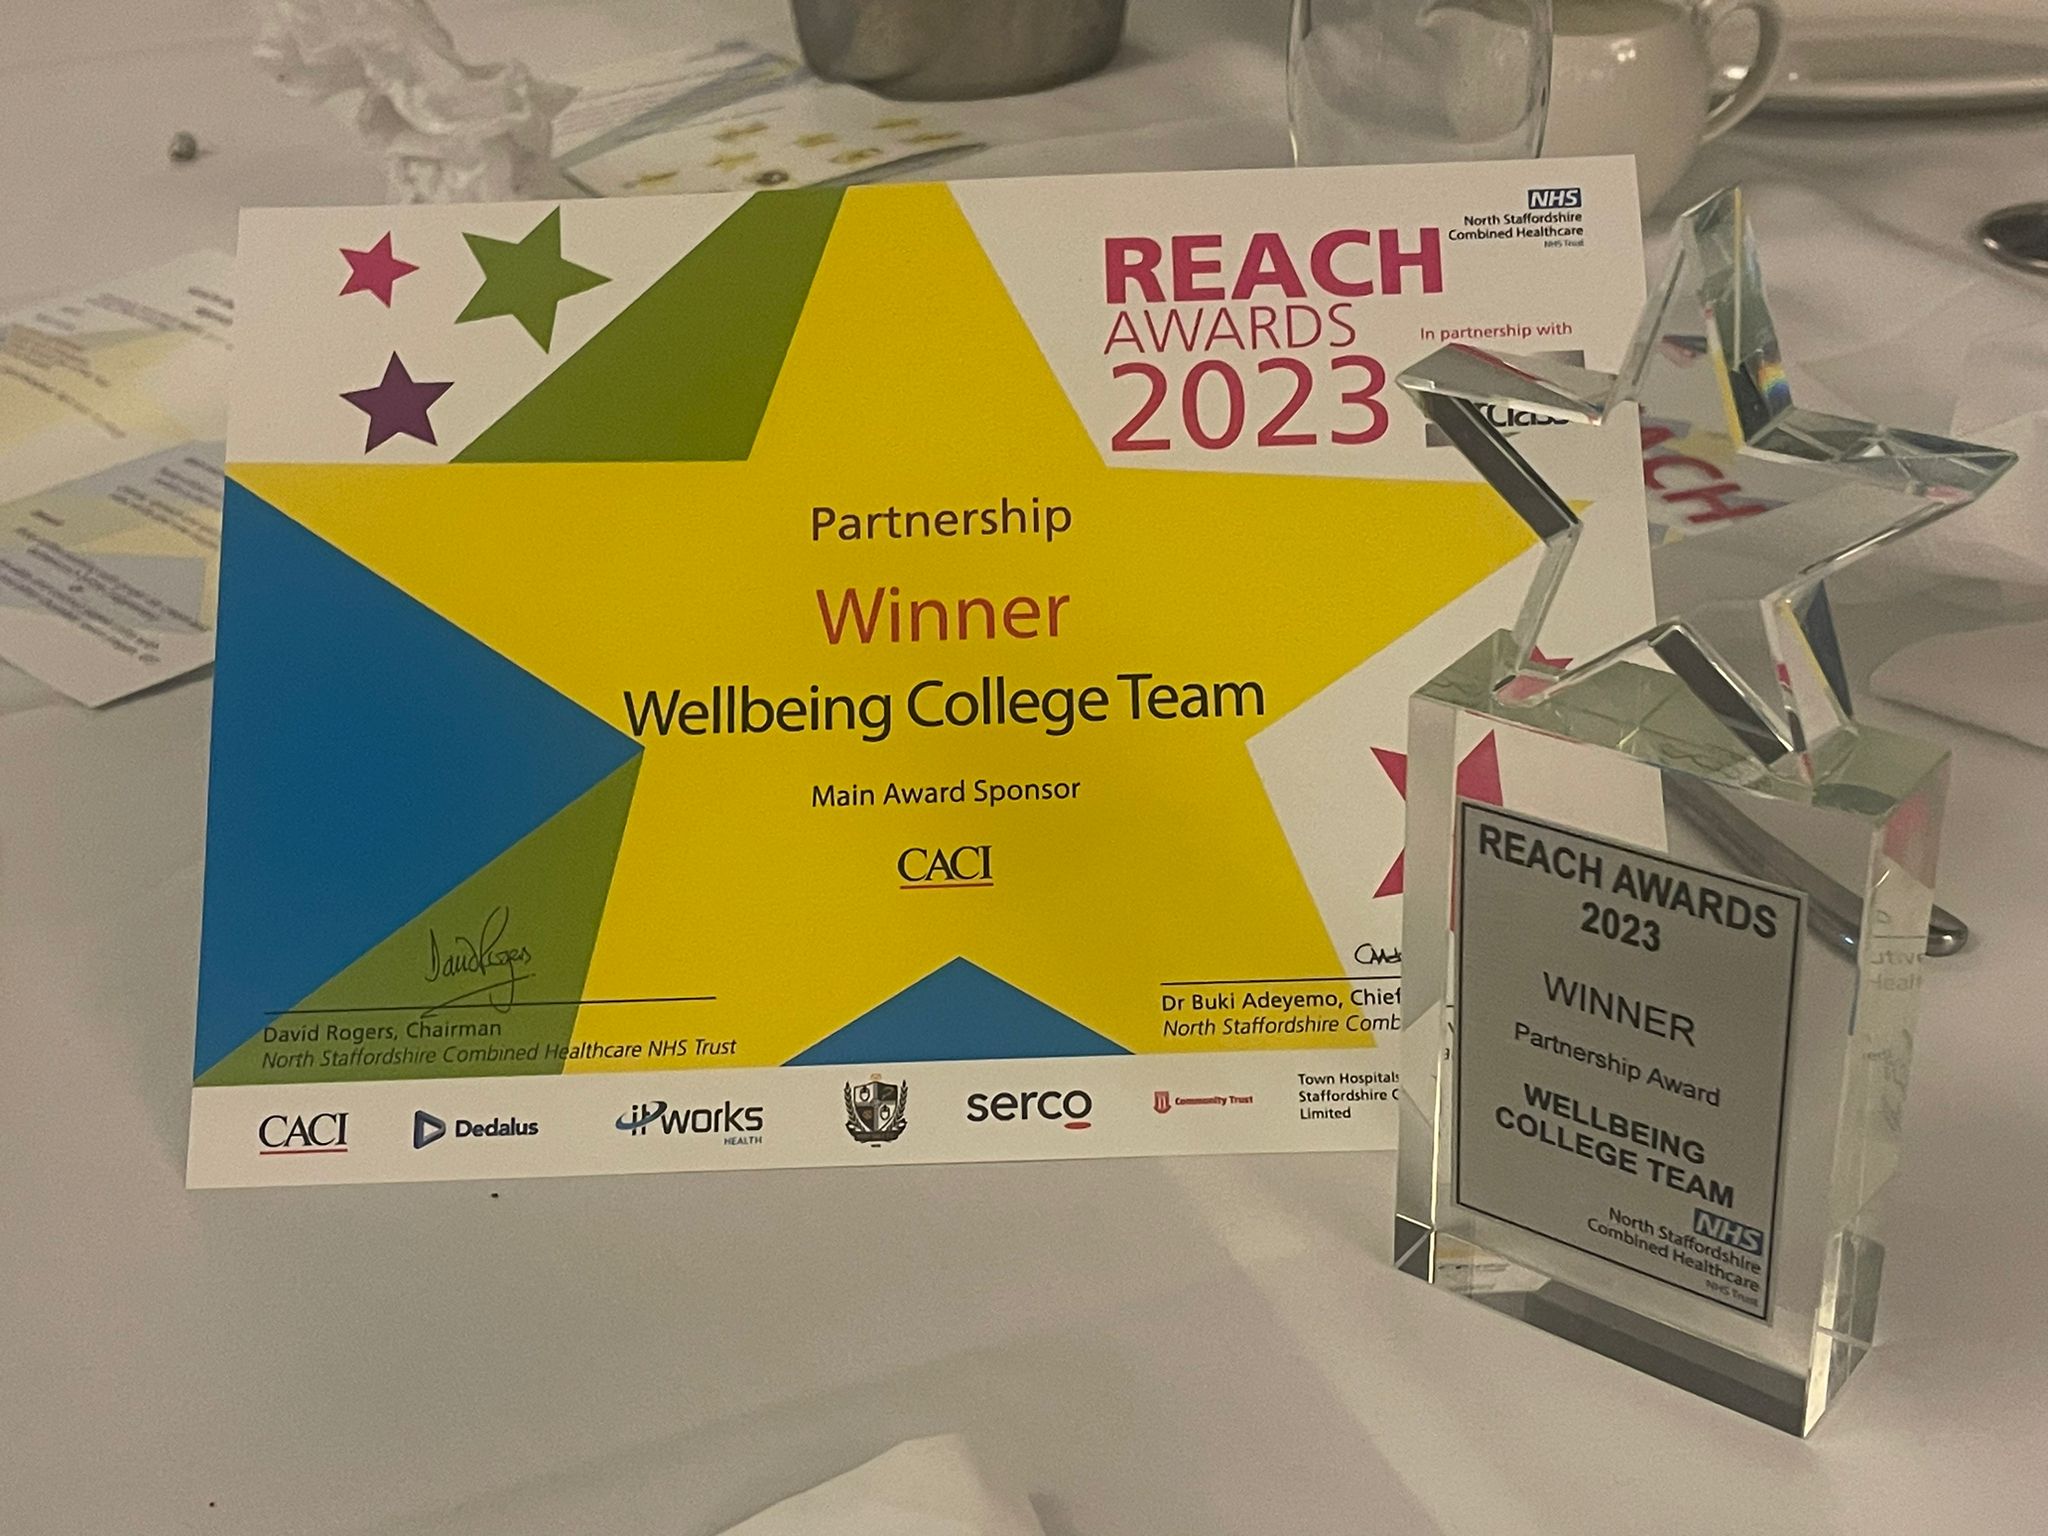 REACH award for Partnership of the year 2023, Wellbeing College